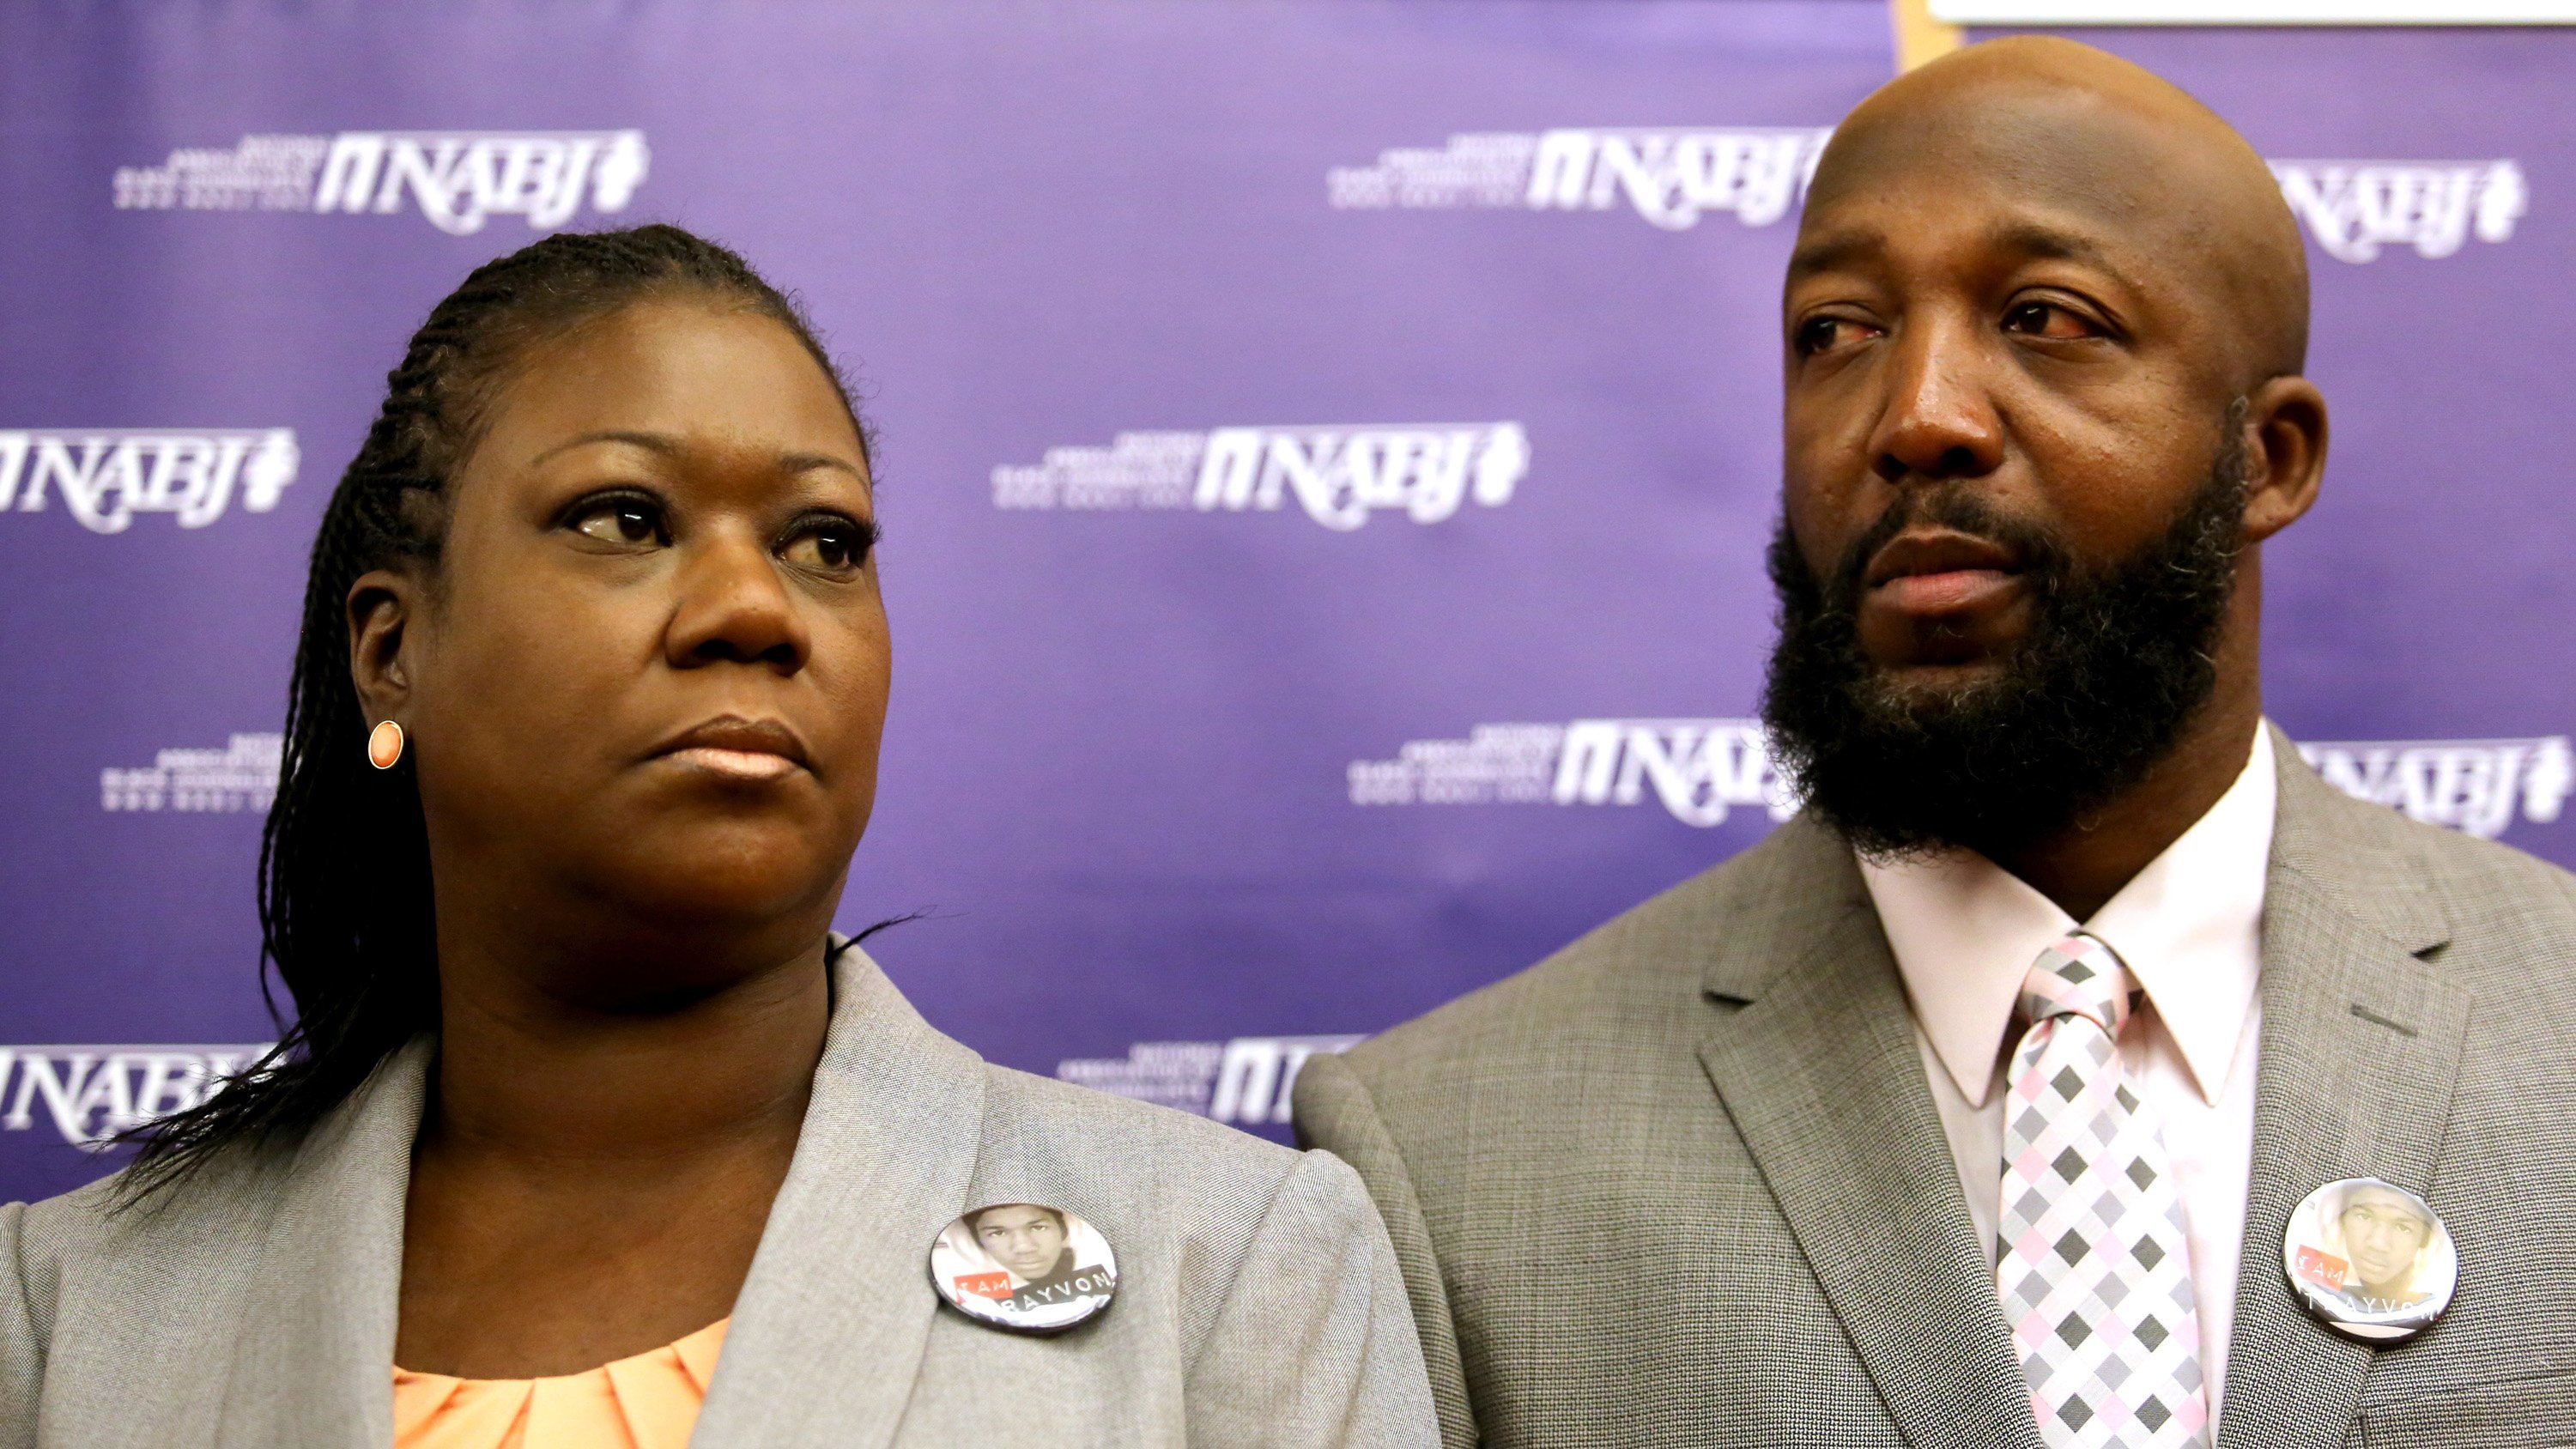 The parents of Trayvon Martin, Sybrina Fulton, left, and Tracy Martin, listen to their attorneys, during a news conference at the National Association of Black Journalists national convention, in Orlando, Florida, Friday, August 2, 2013. (Joe Burbank/Orlando Sentinel—MCT/Getty Images)